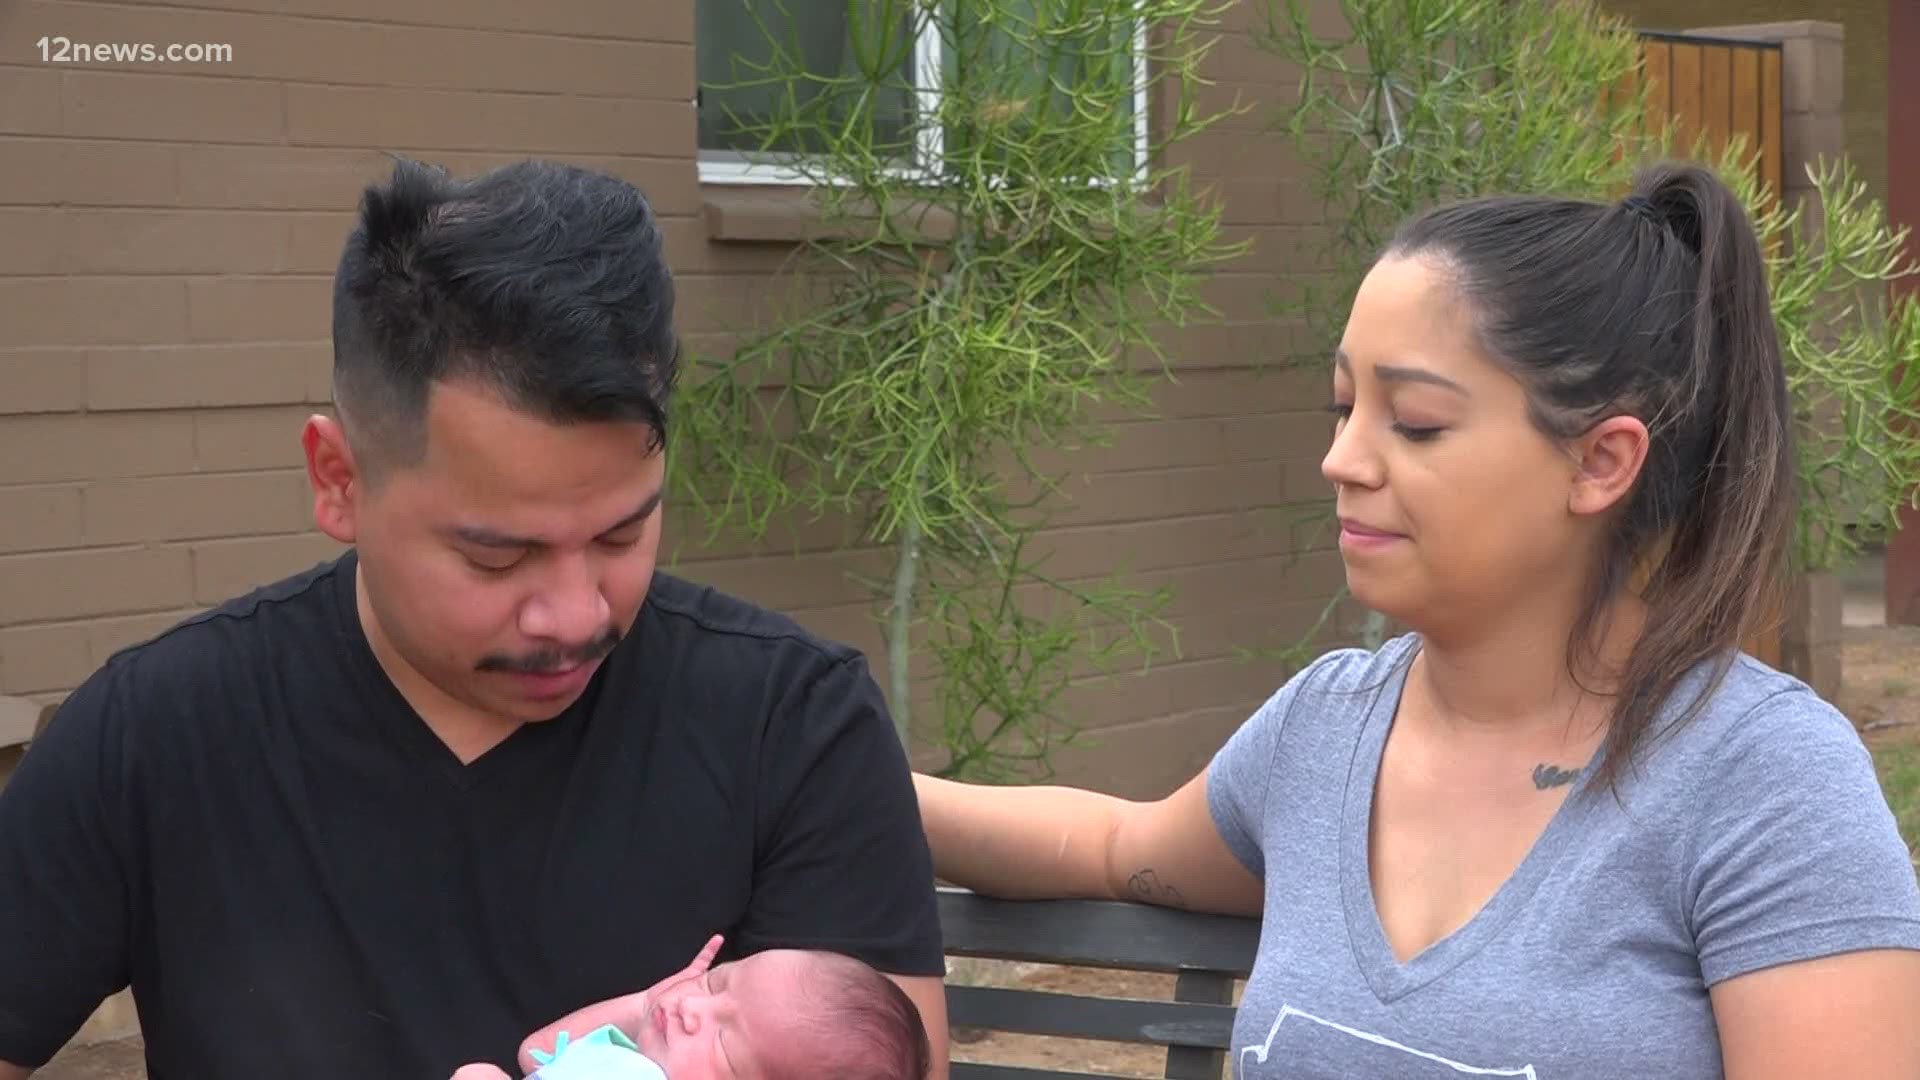 A family is reunited after the father misses the birth of his first child while in ICE custody. Now the family is fighting to stay together.